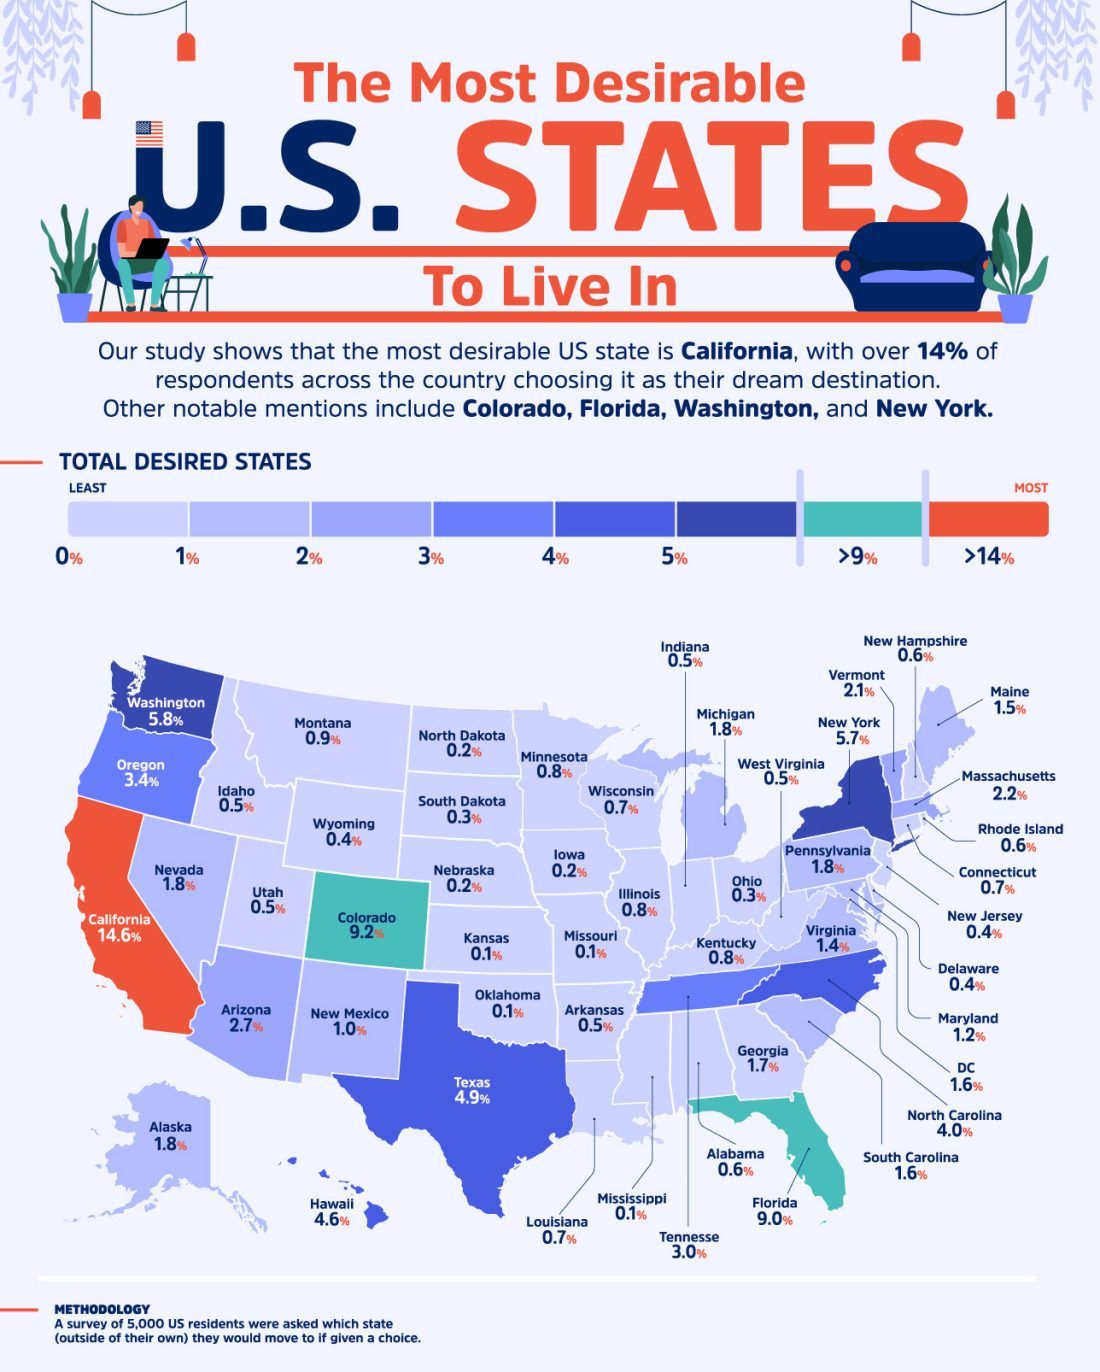 Relocation The Most Desirable US States and Foreign Countries